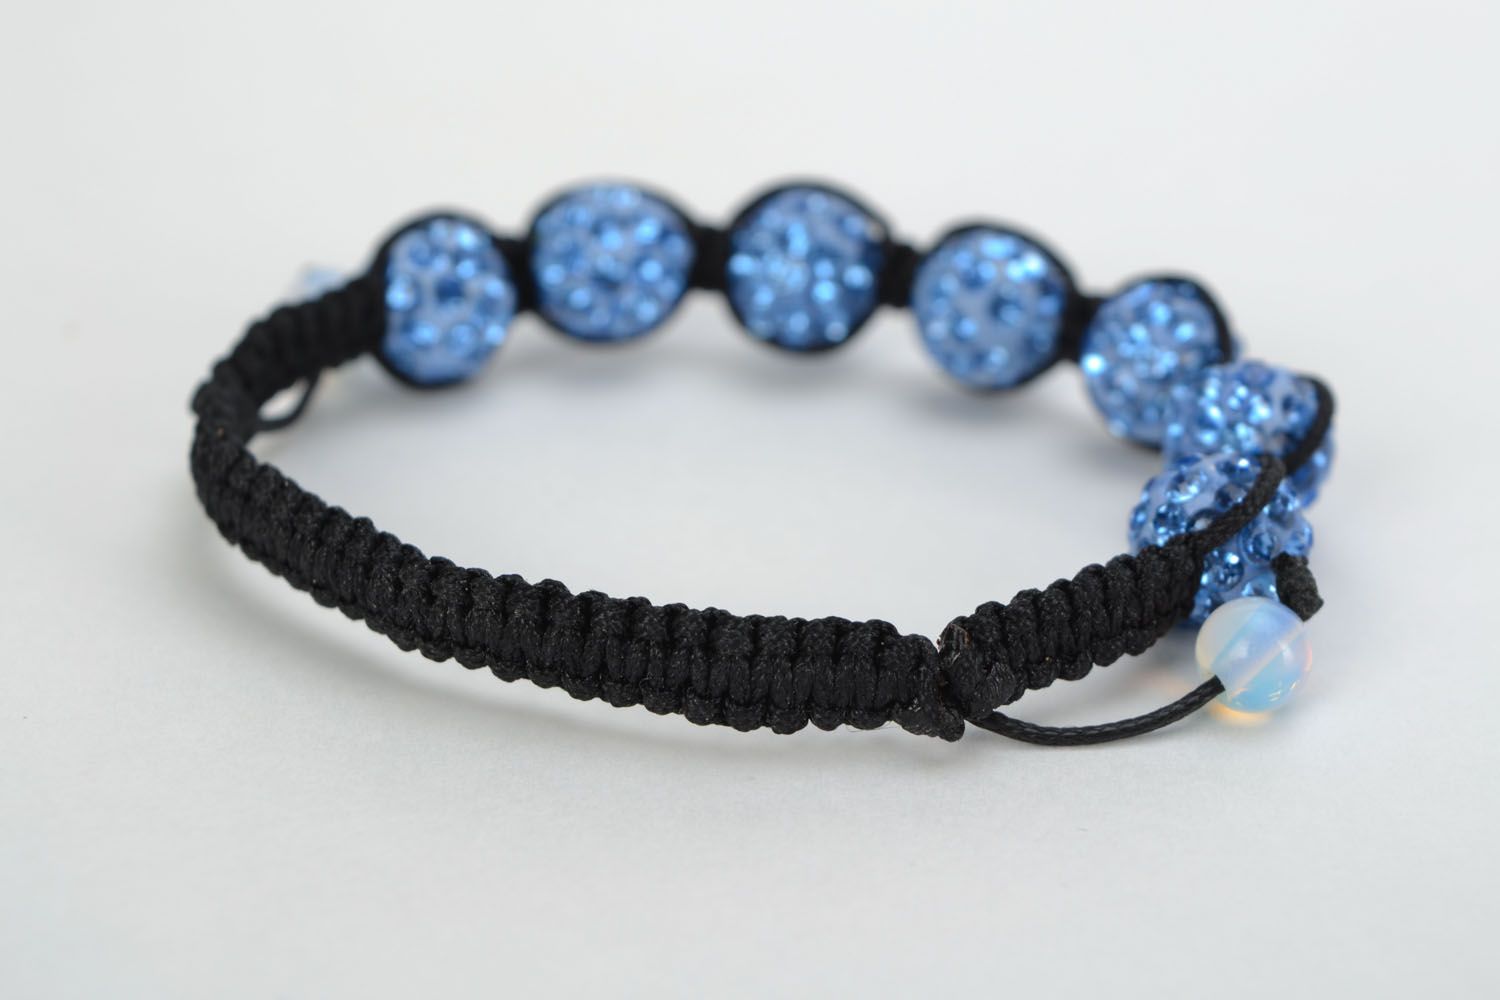 Bracelet made of blue beads and cord photo 5